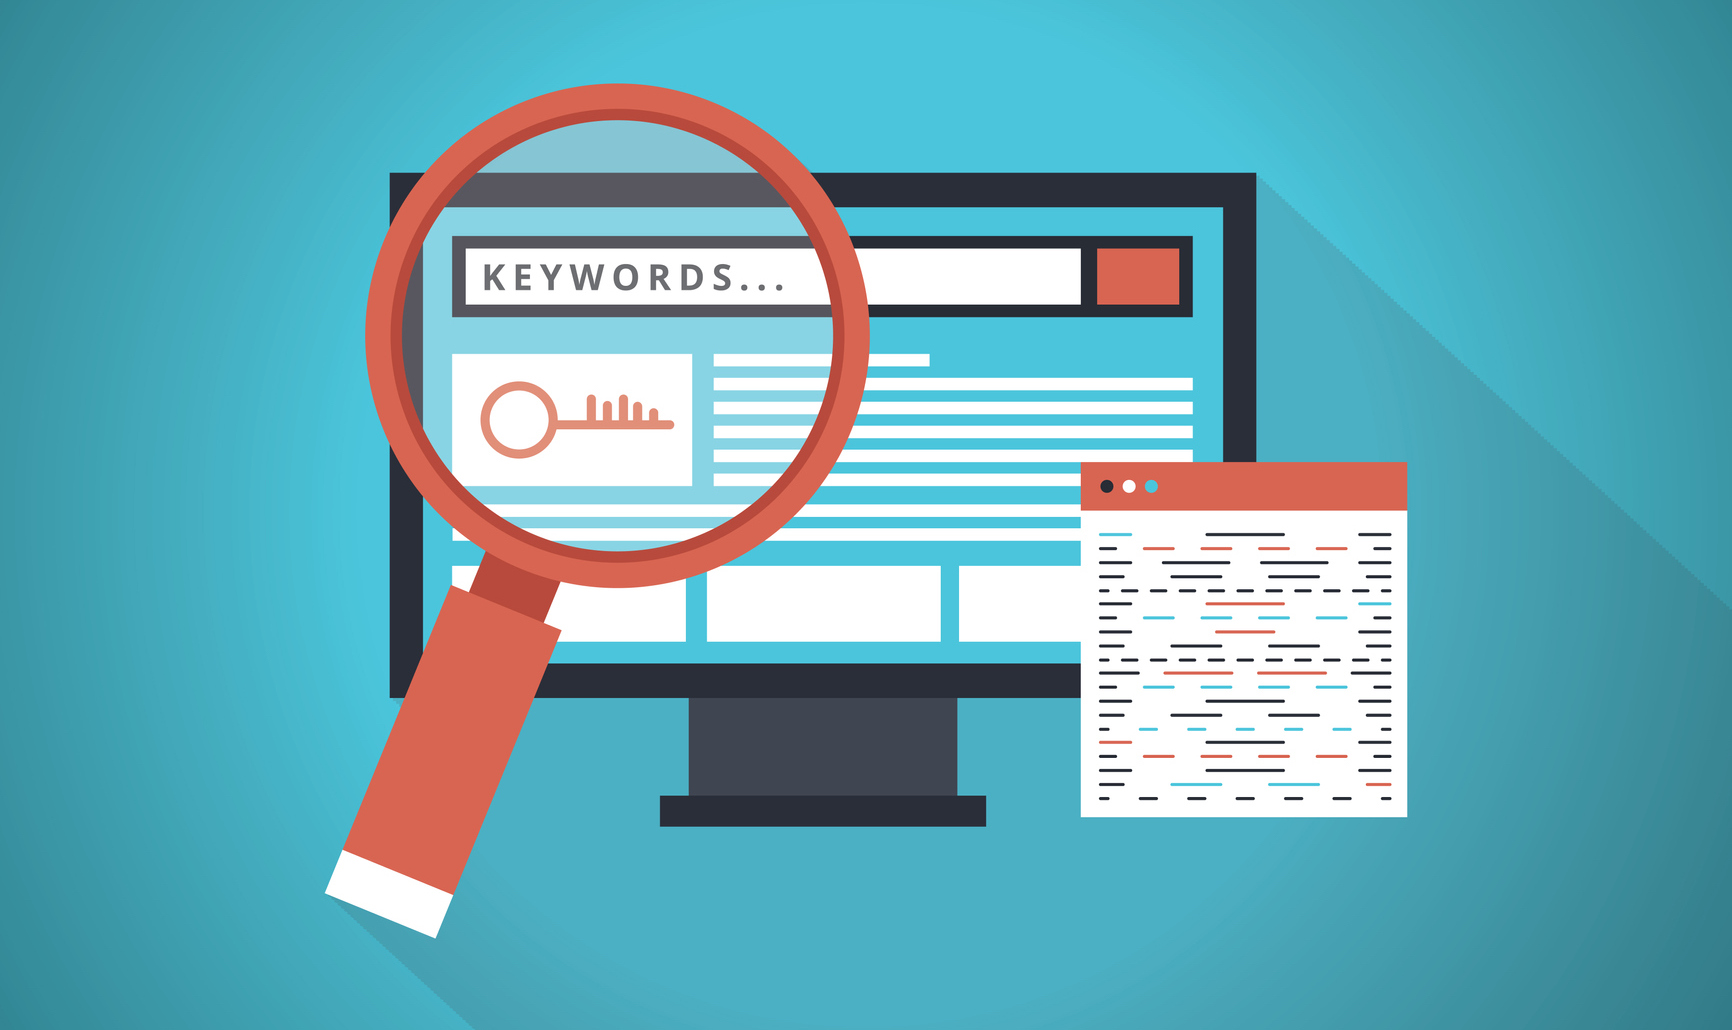 Keyword Stuffing Your Content? Avoid it at All Costs